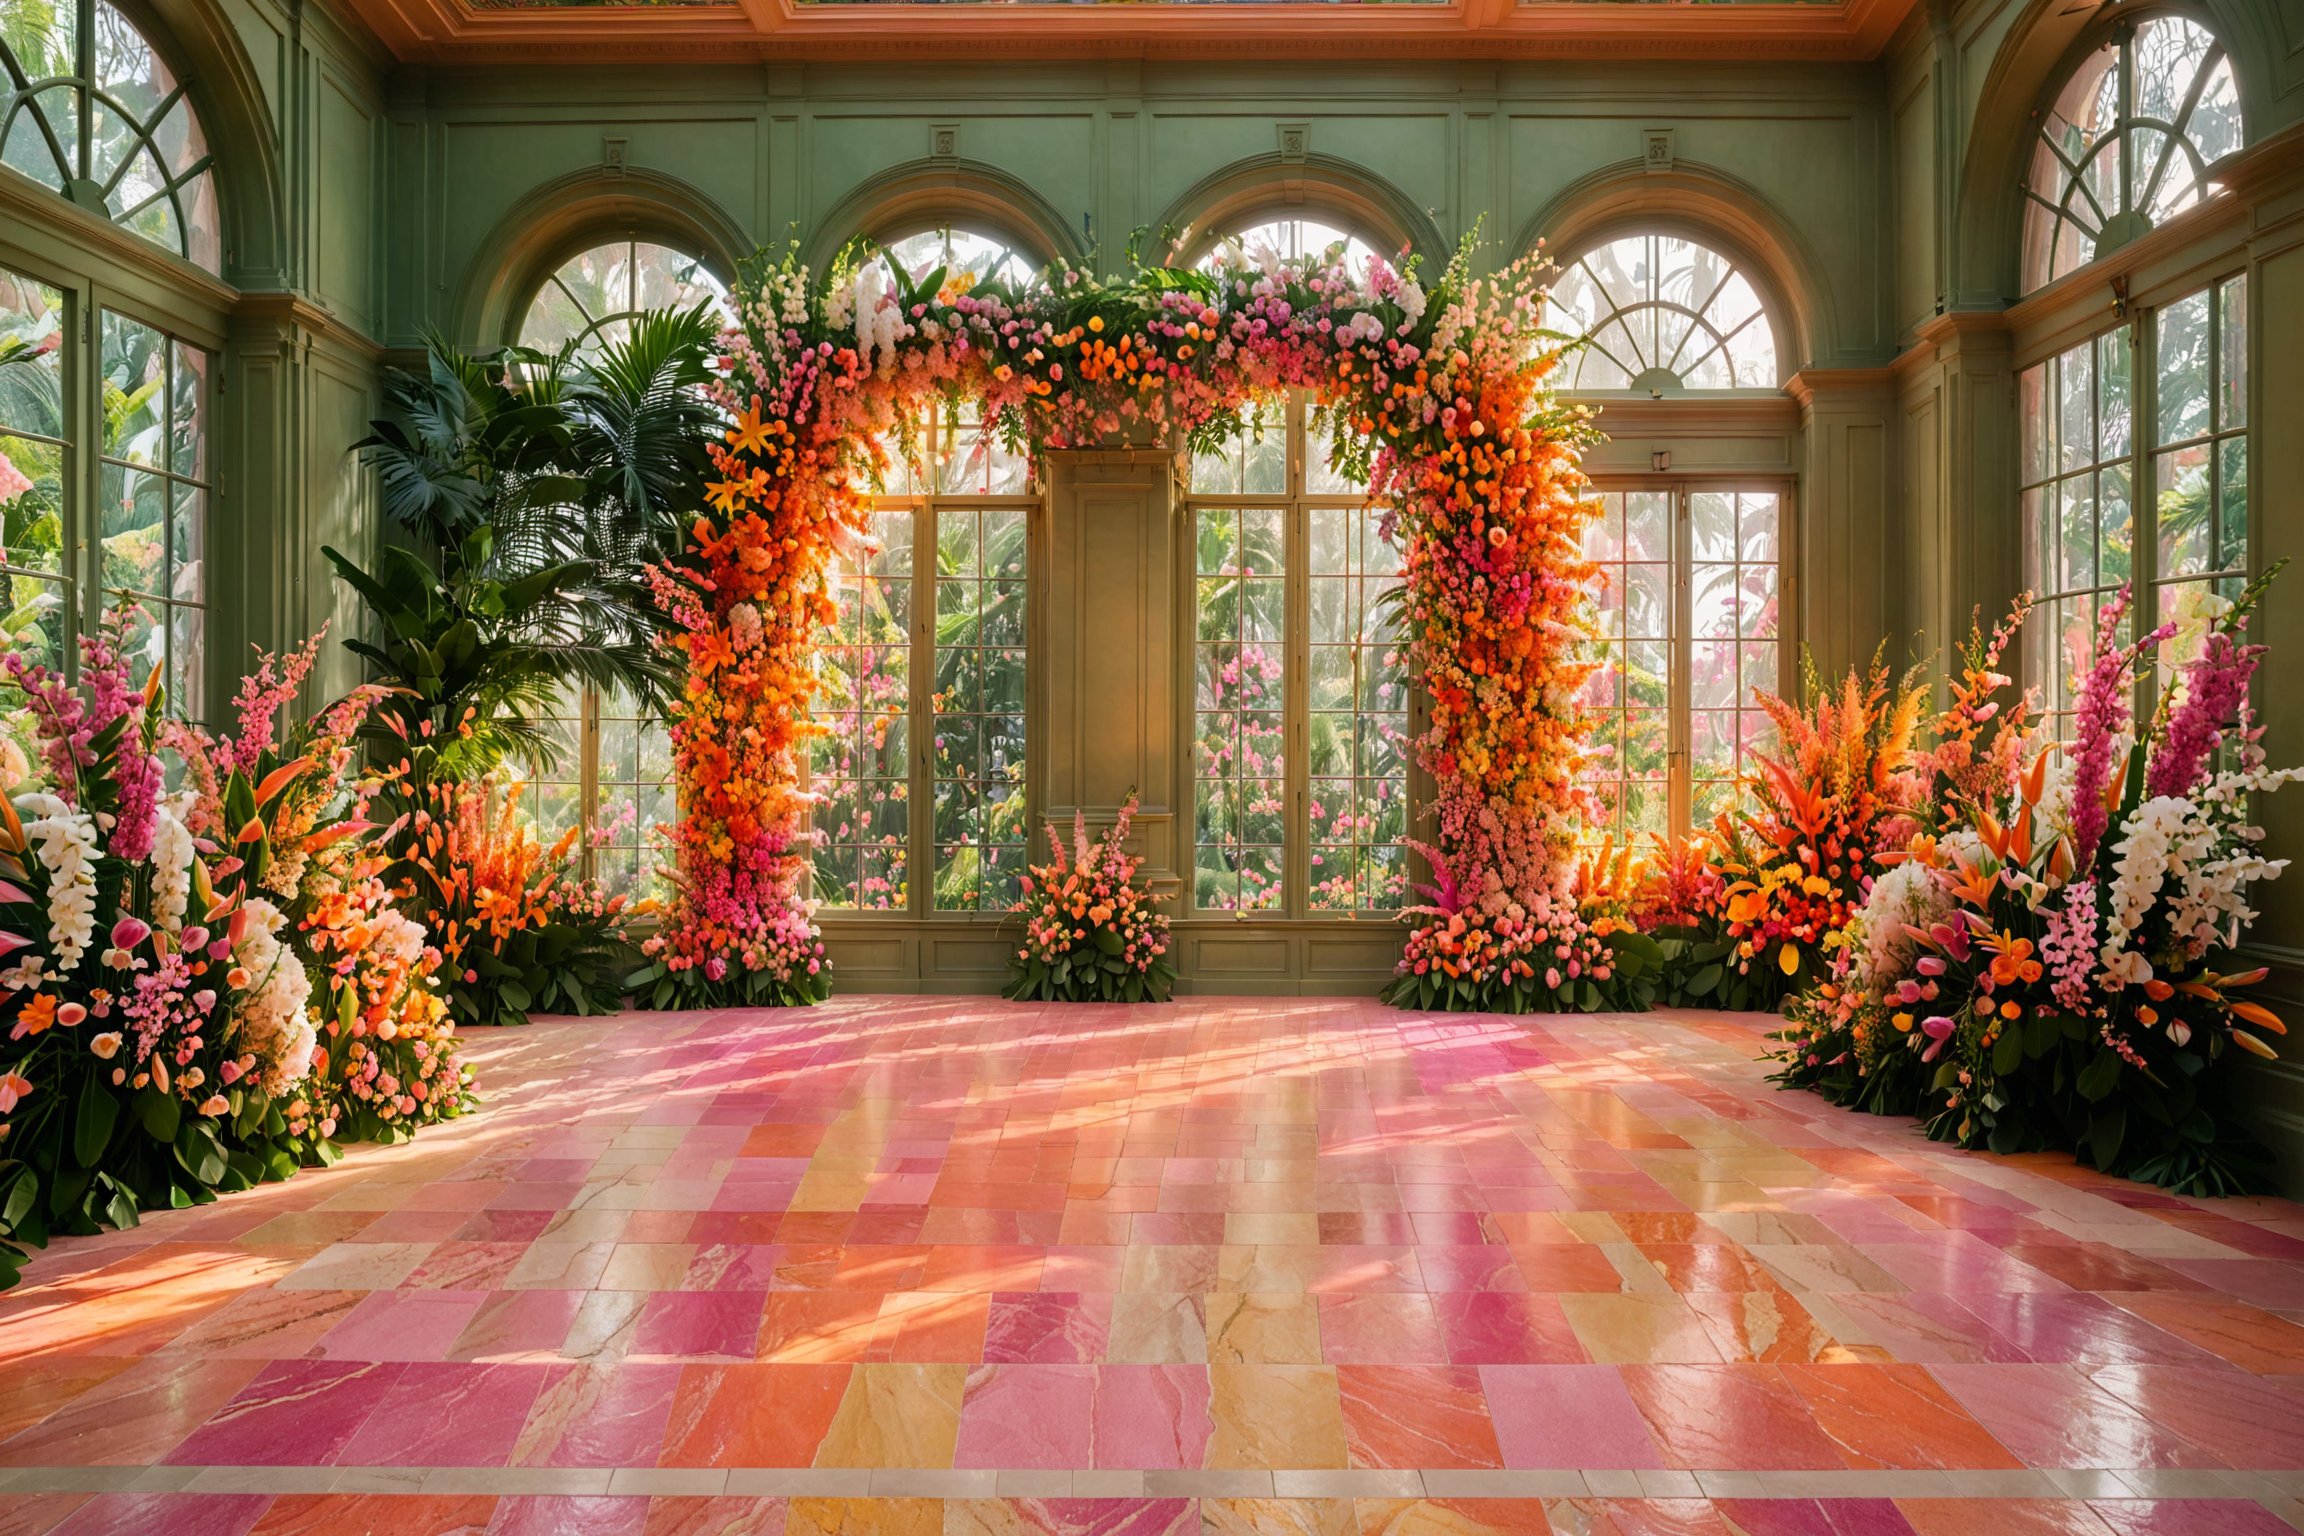 An opulent room with large arched windows that let in soft sunlight. The room is adorned with a vibrant floral arch, bursting with a myriad of flowers in hues of pink, orange, yellow, and white. The floral arrangement spans from the floor to the ceiling, creating a canopy-like effect. The walls are painted in a muted green, and the floor is made of polished stone tiles. The room's architecture, with its arched windows and intricate moldings, exudes a sense of grandeur and elegance.